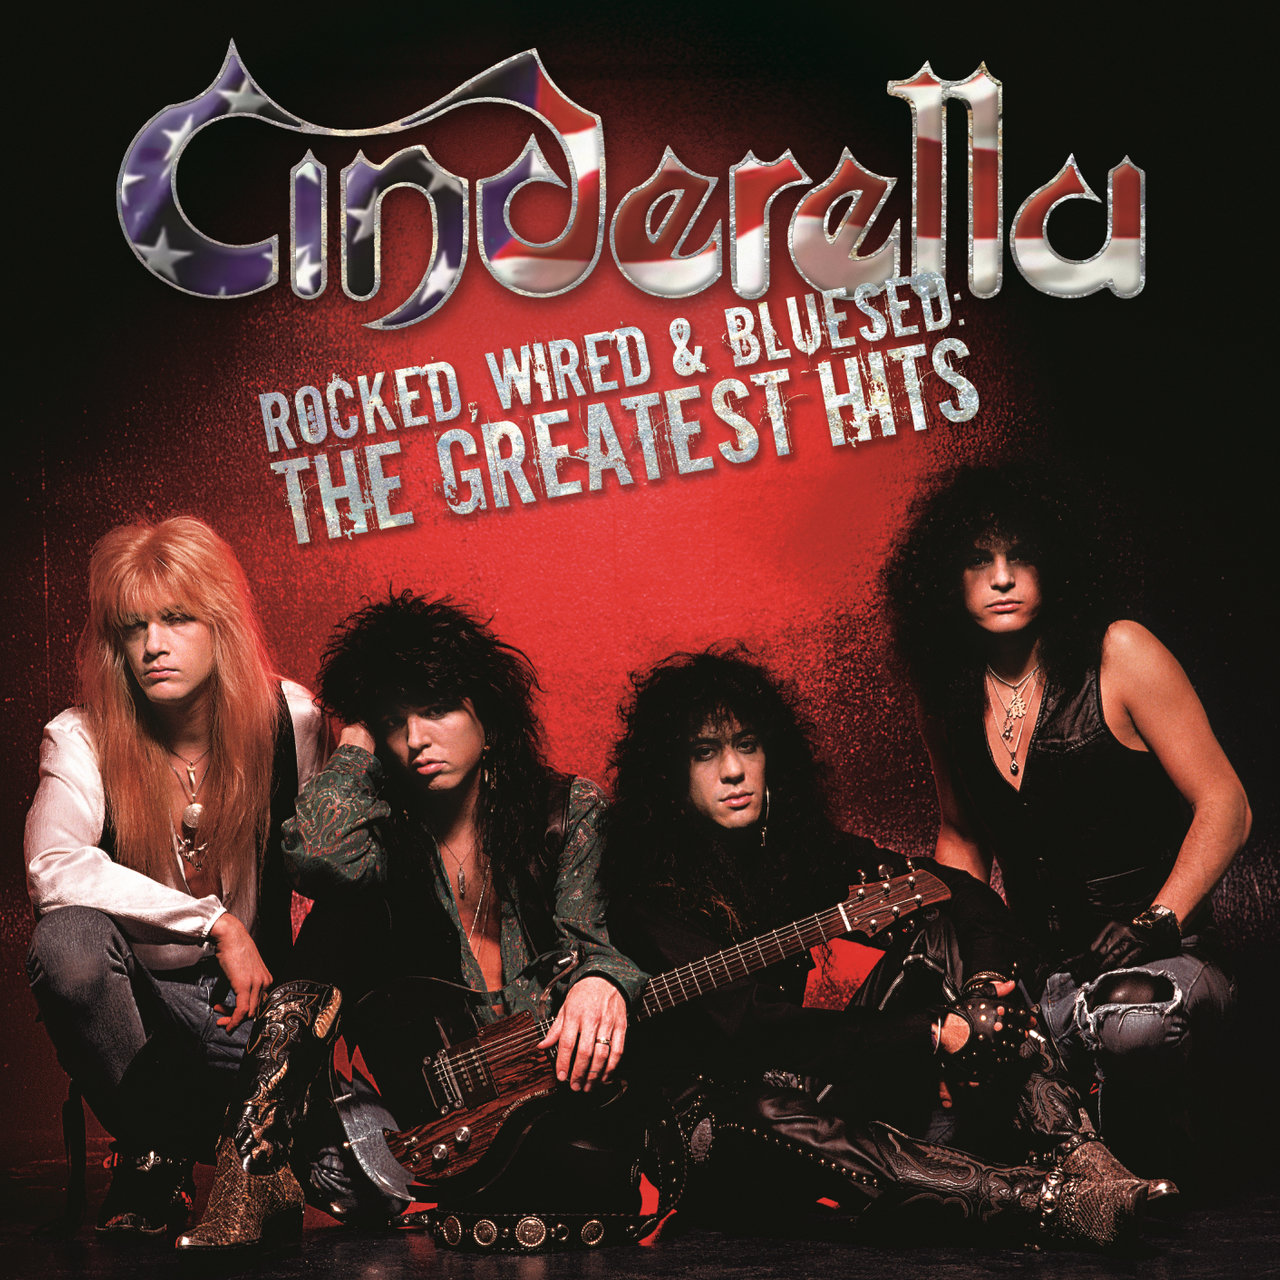 CD Cinderella - Rocked, wired & bluesed - The greatest hits